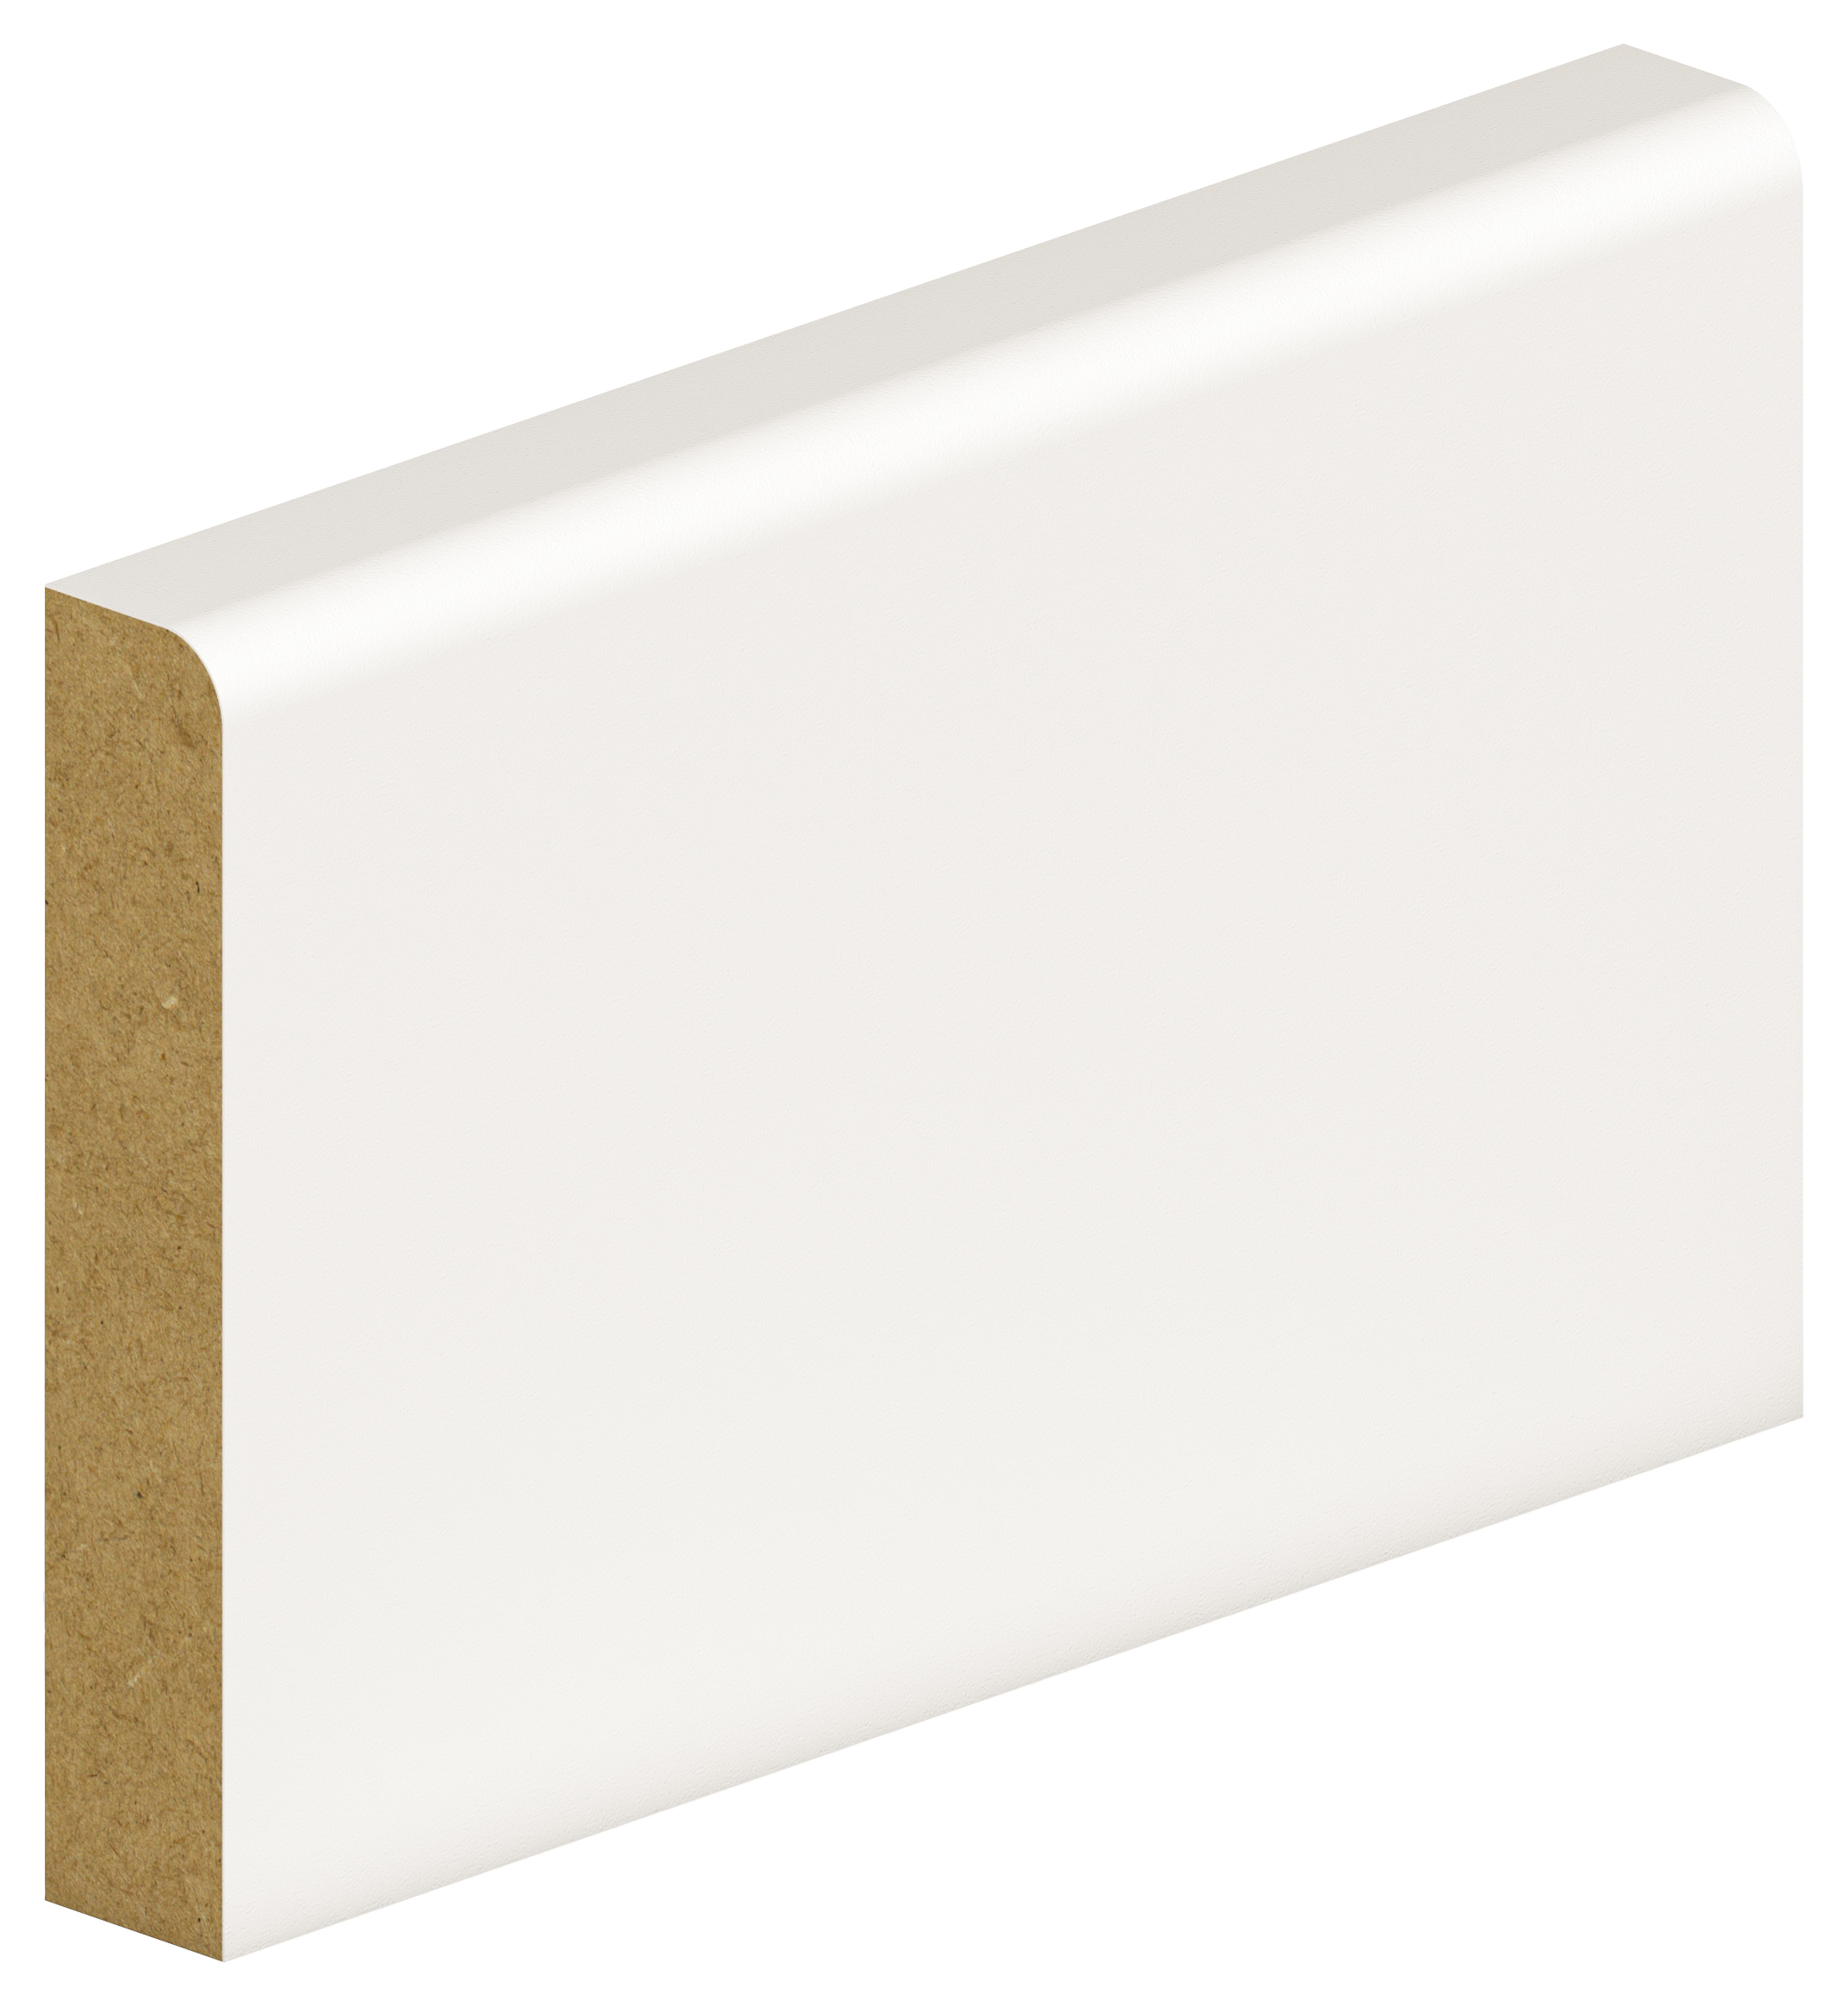 Image of Pencil Round Primed MDF Architrave - 18 x 69 x 2200mm - Pack of 5